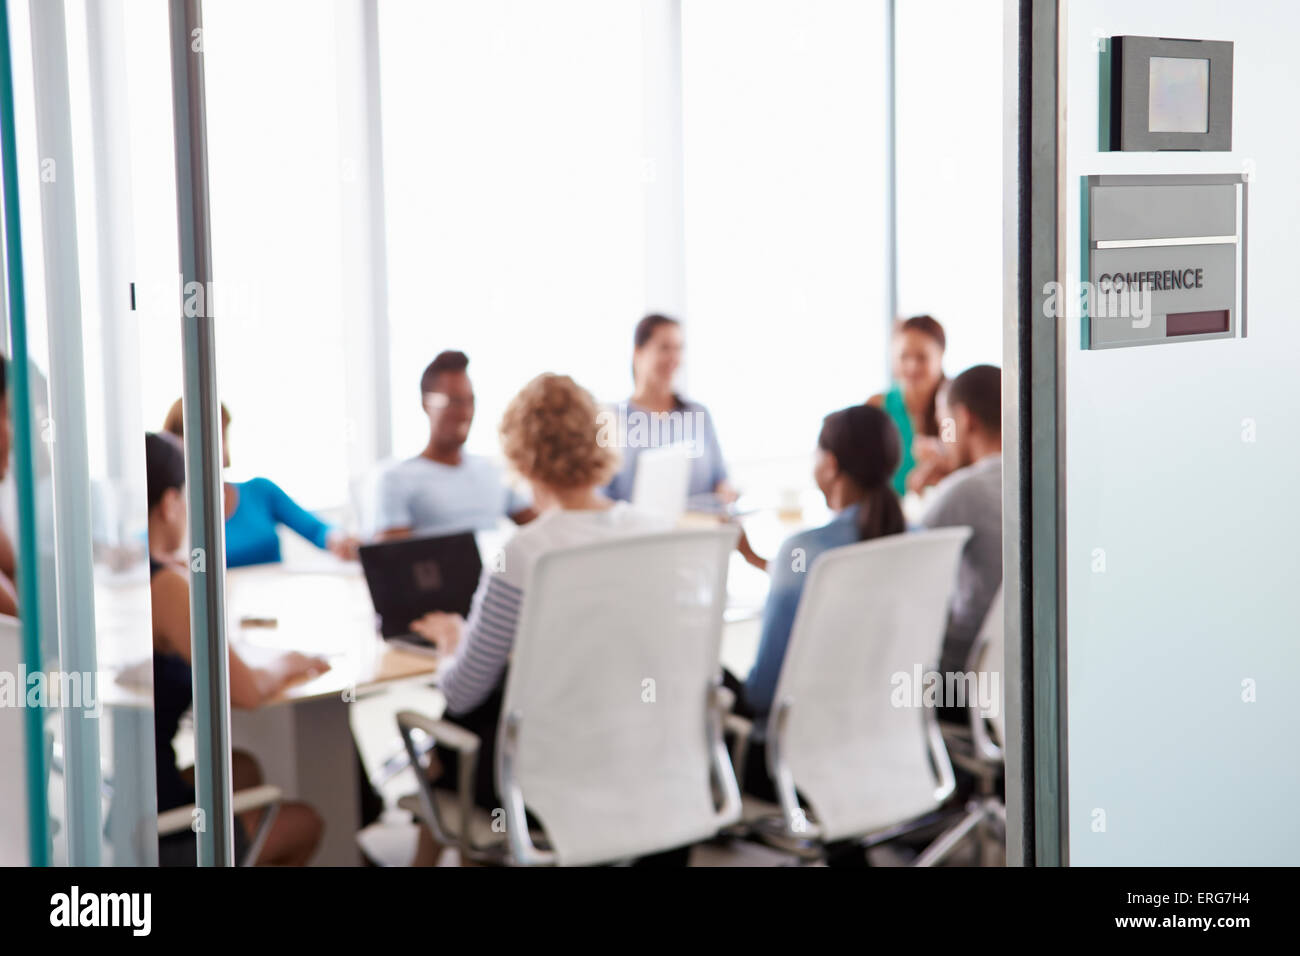 View Through Door Of Conference Room To Business Meeting Stock Photo